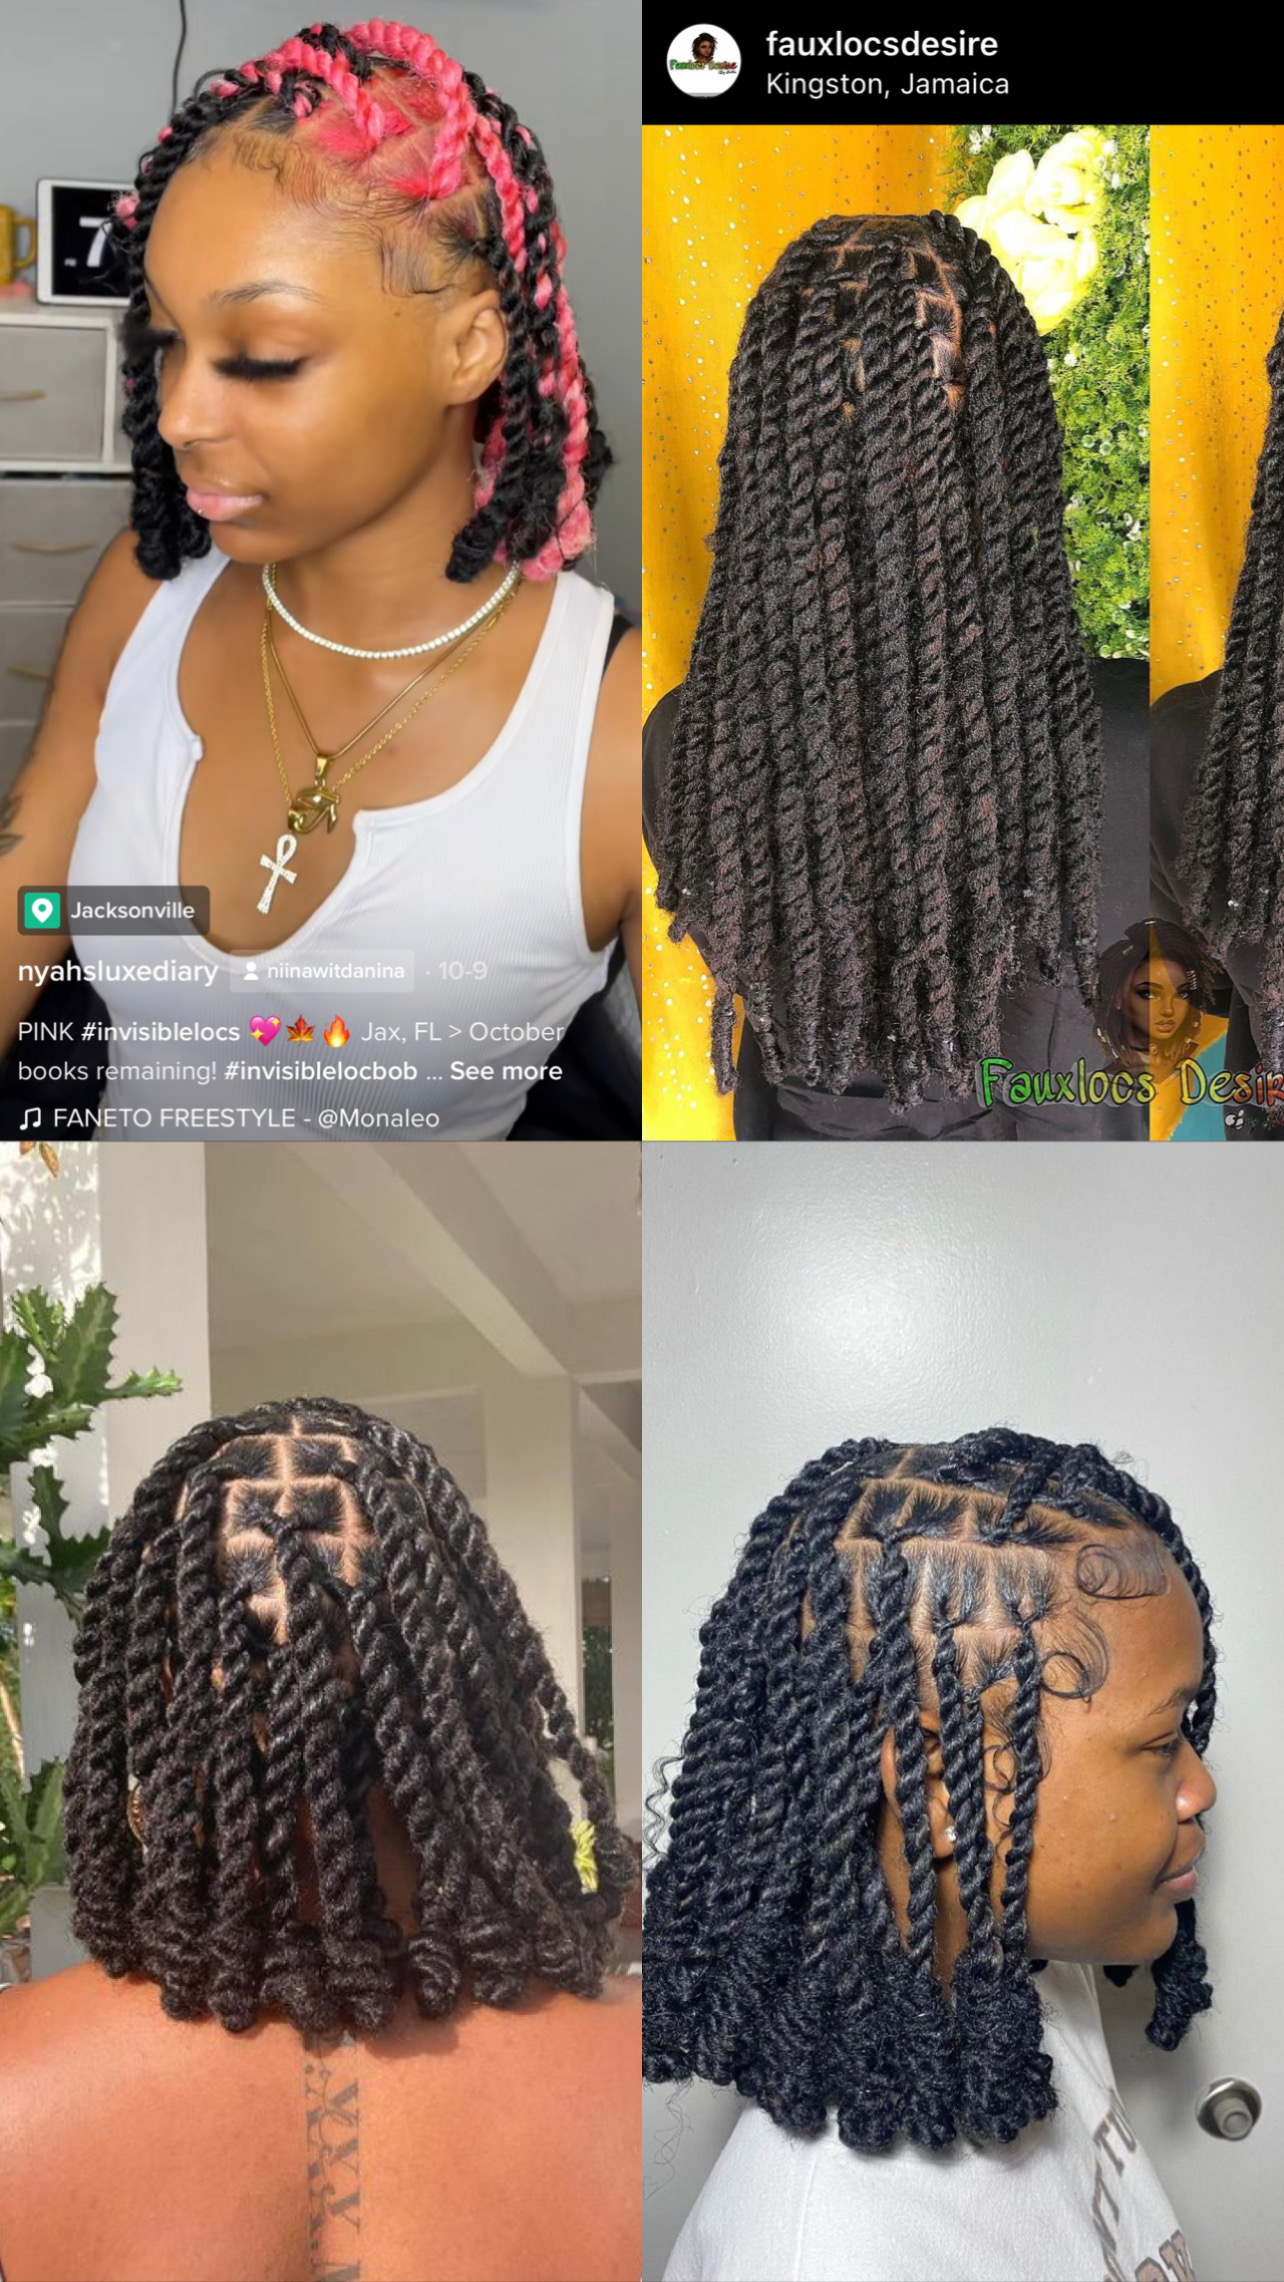 Faux locs are trending – The Famuan